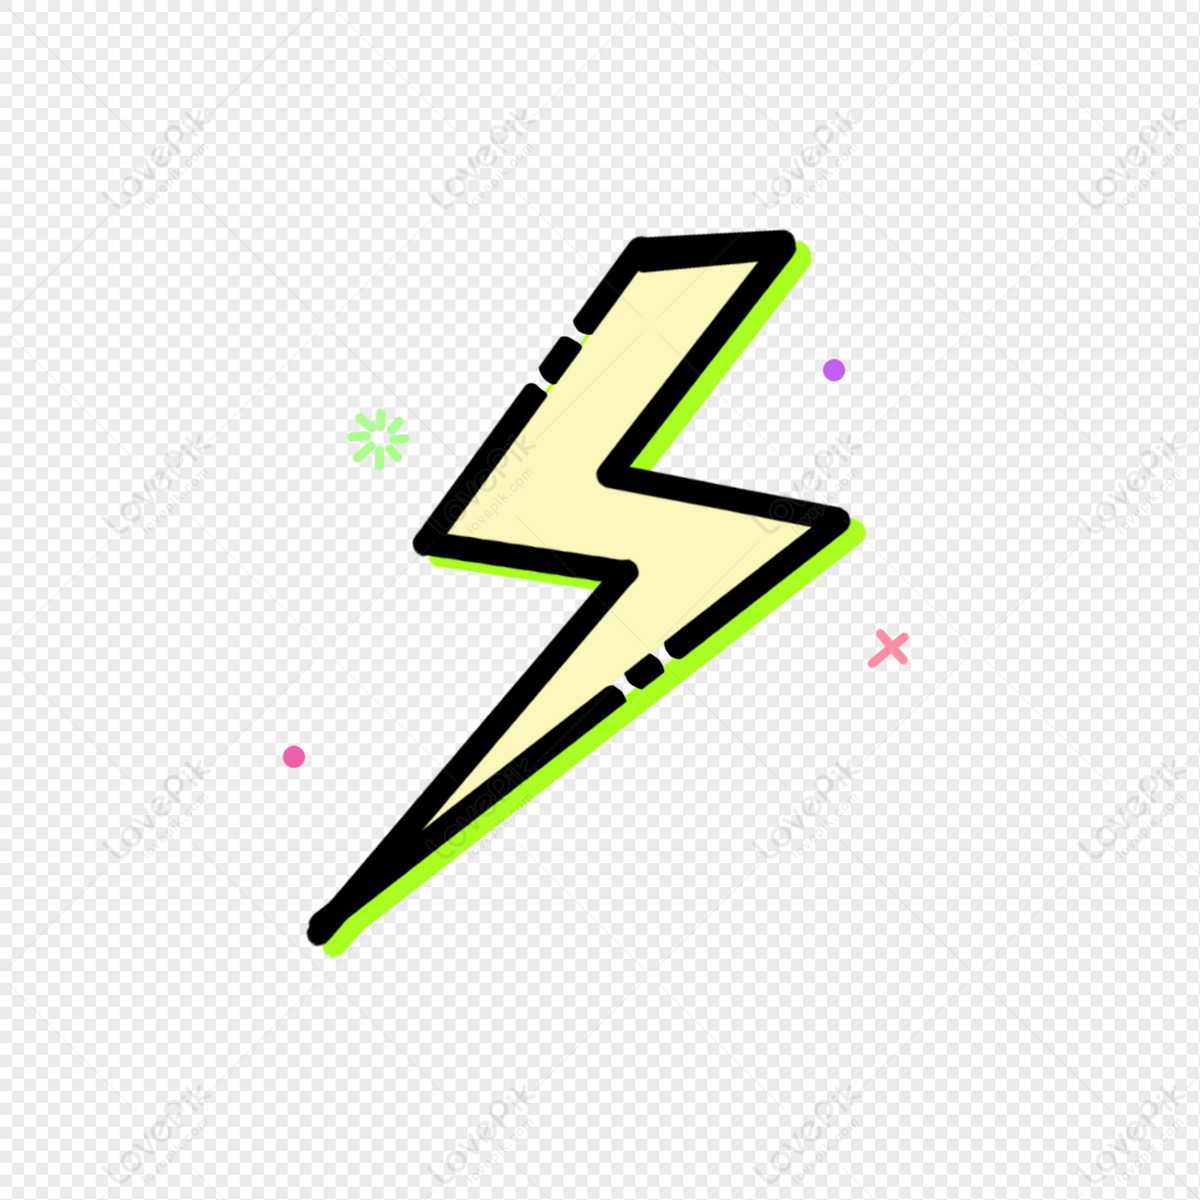 Lightning PNG Hd Transparent Image And Clipart Image For Free Download -  Lovepik | 401296314